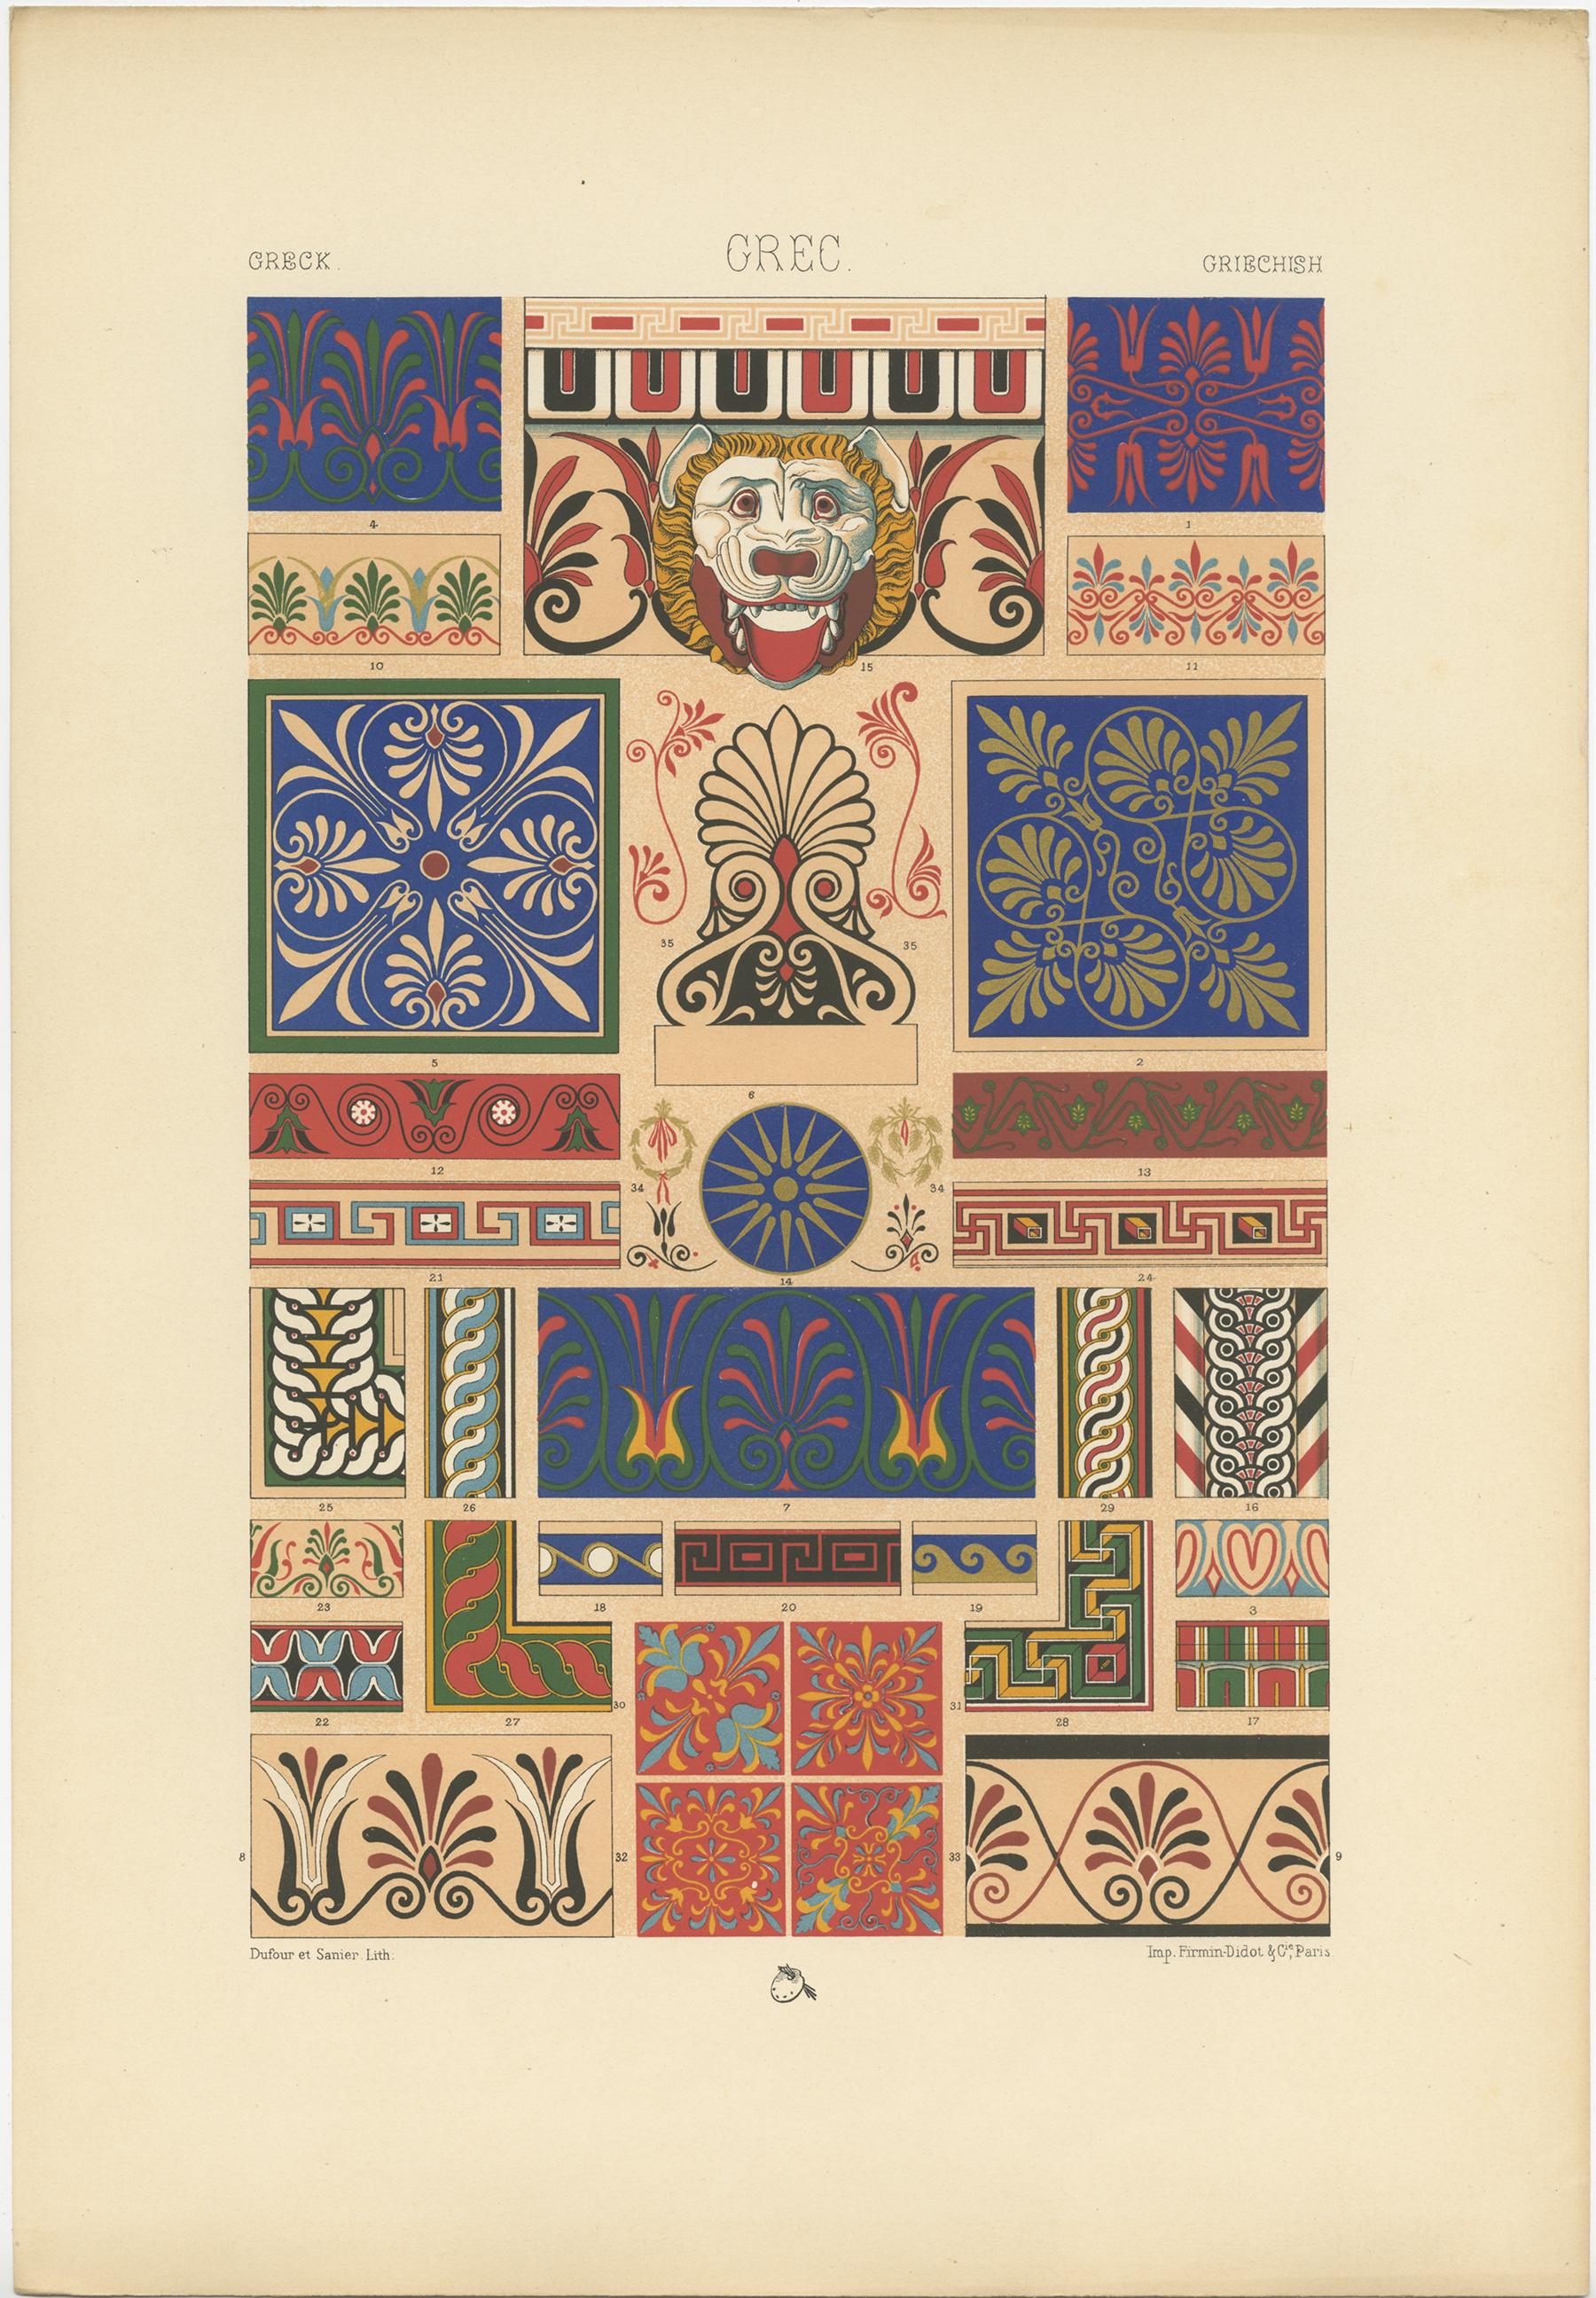 Antique print titled 'Greck - Grec - Griechish'. Chromolithograph of Greek ornaments and decorative arts. This print originates from 'l'Ornement Polychrome' by Auguste Racinet. Published circa 1890.